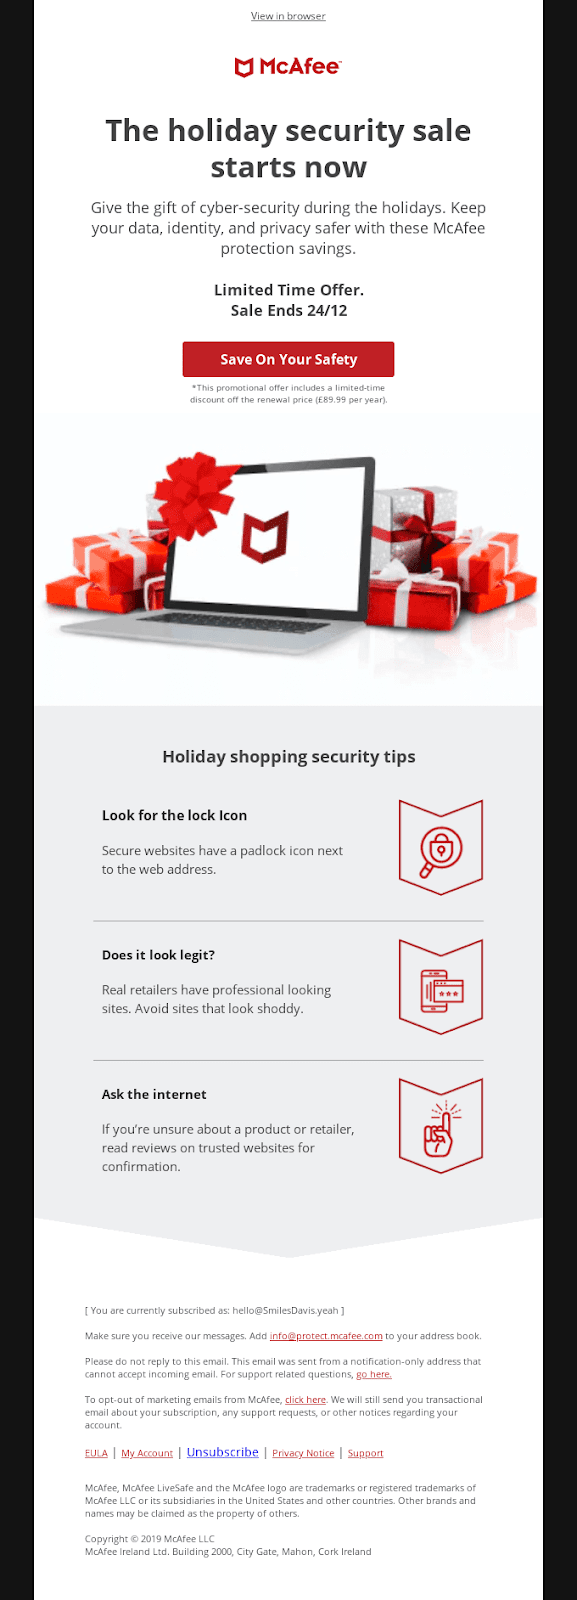 McAfee email example